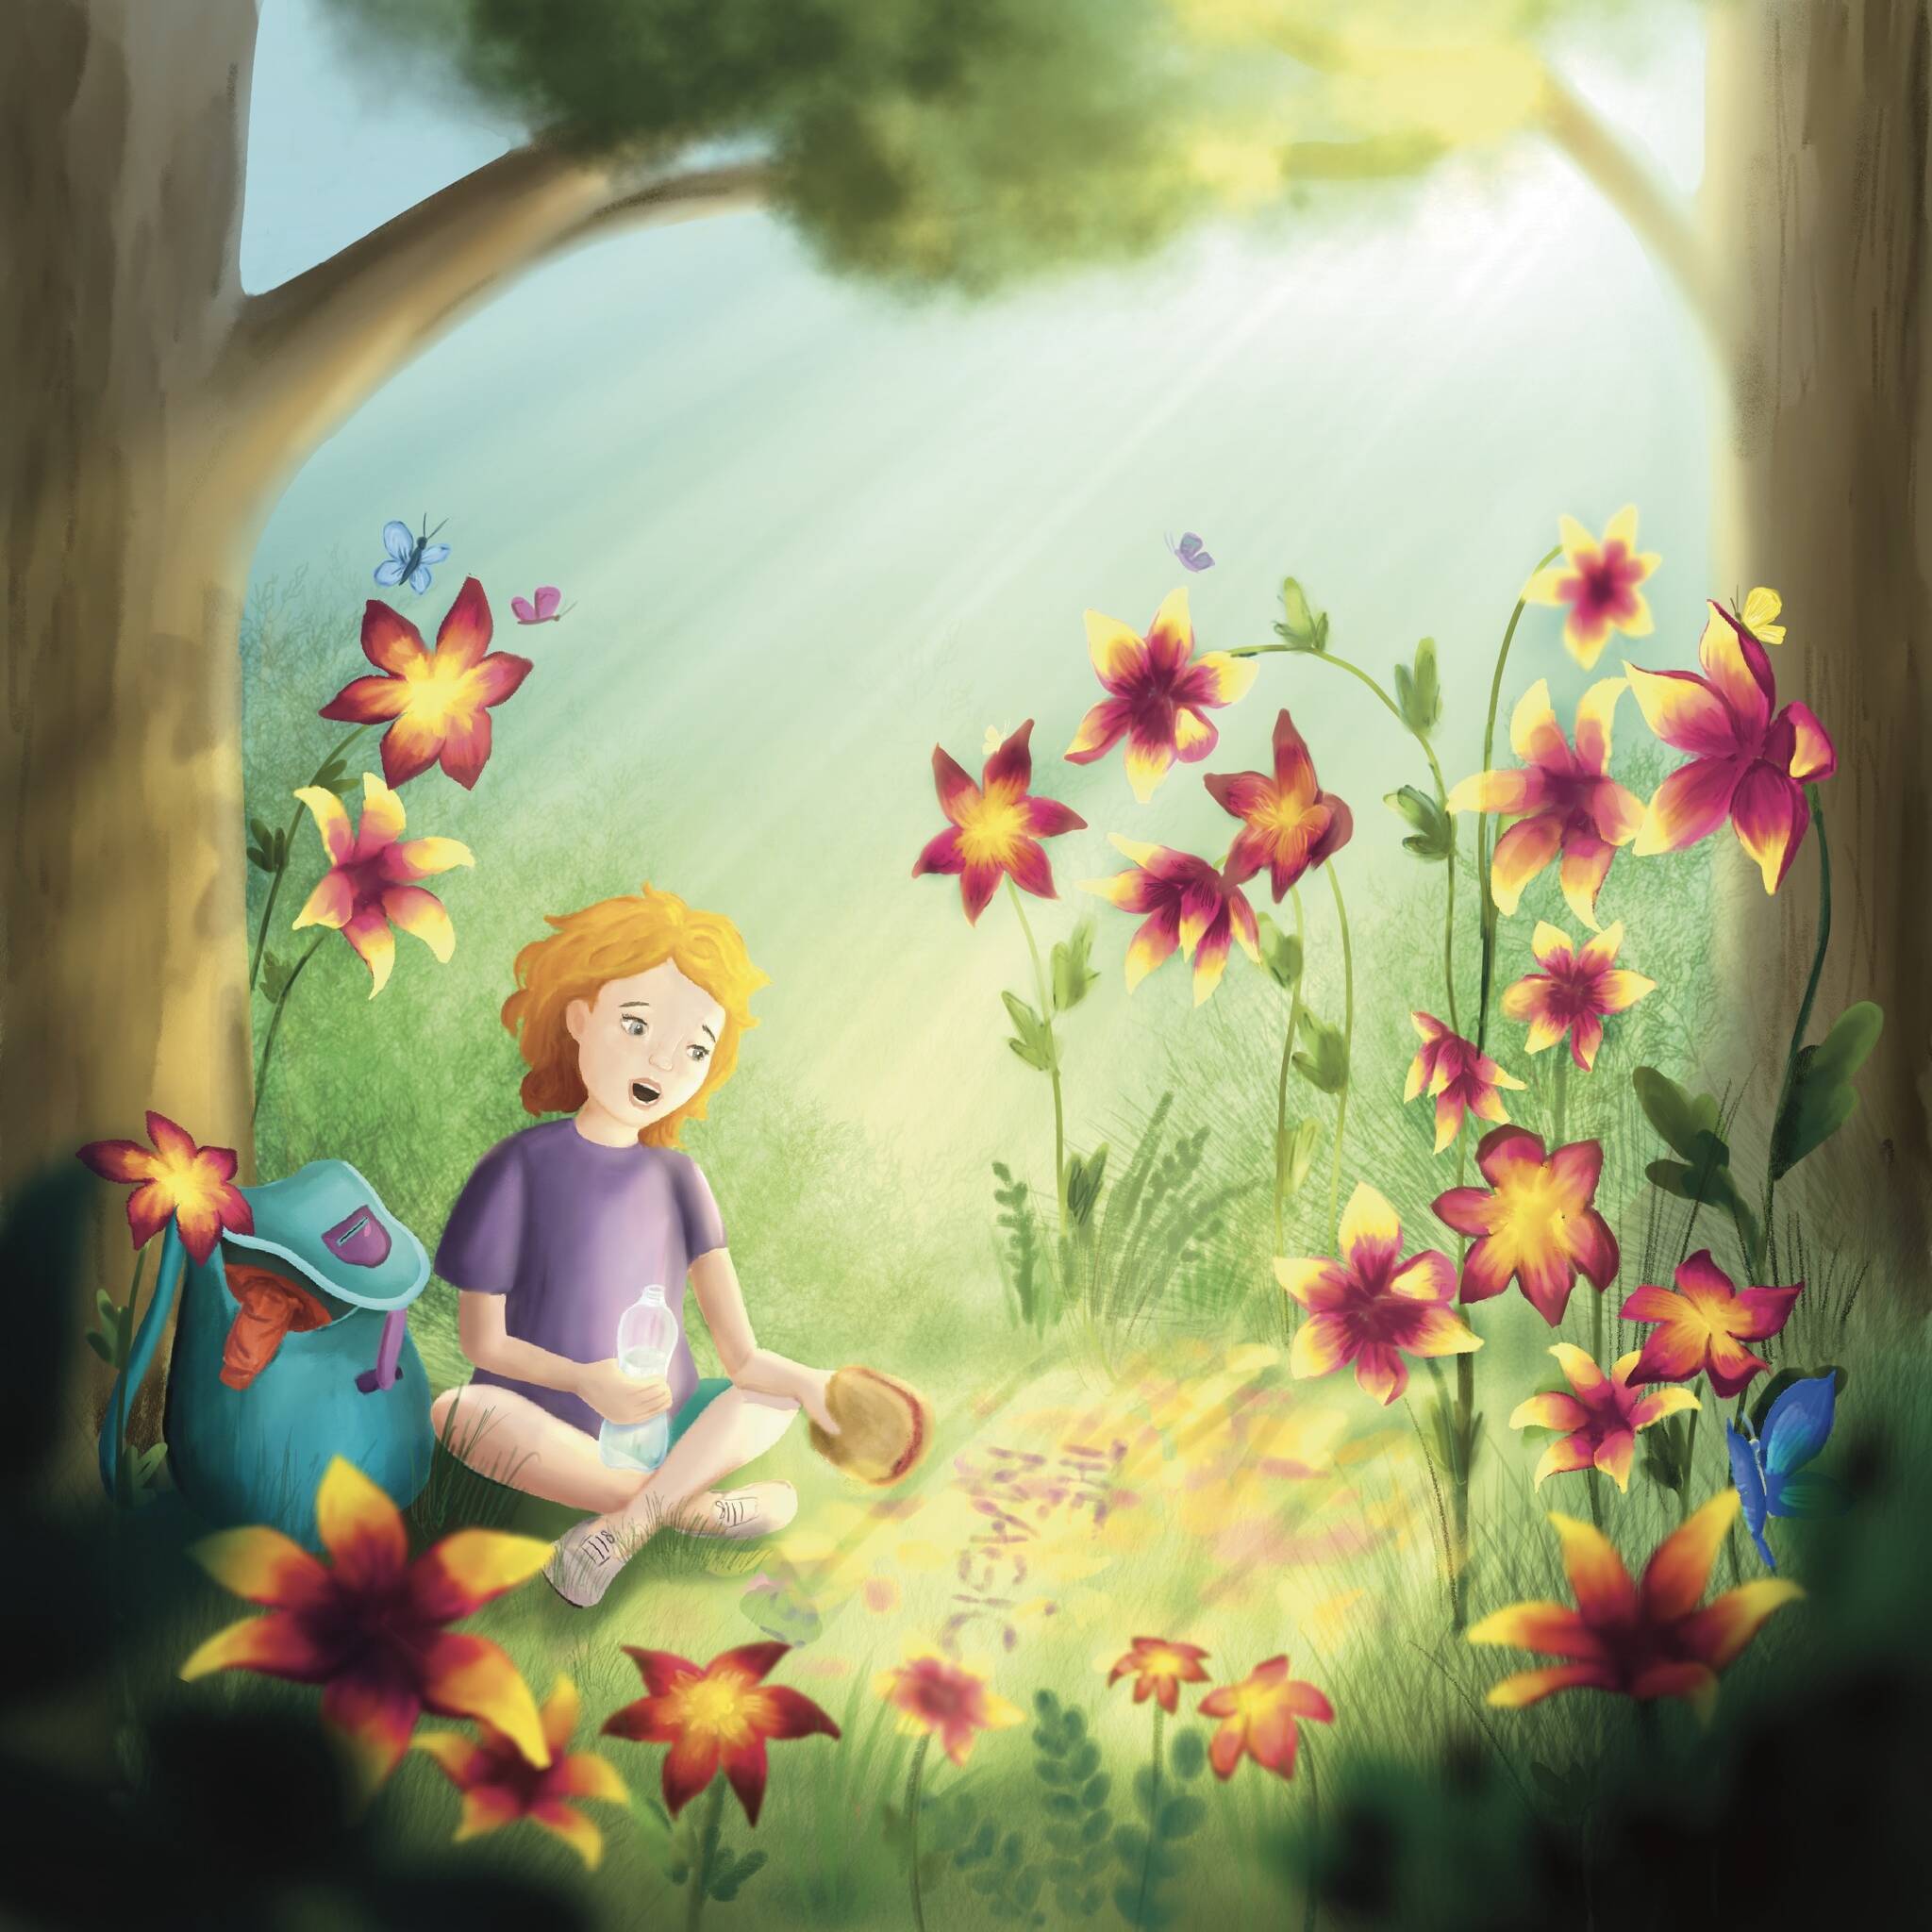 Frankie travels through a beautiful, serene forest. (Illustration provided)